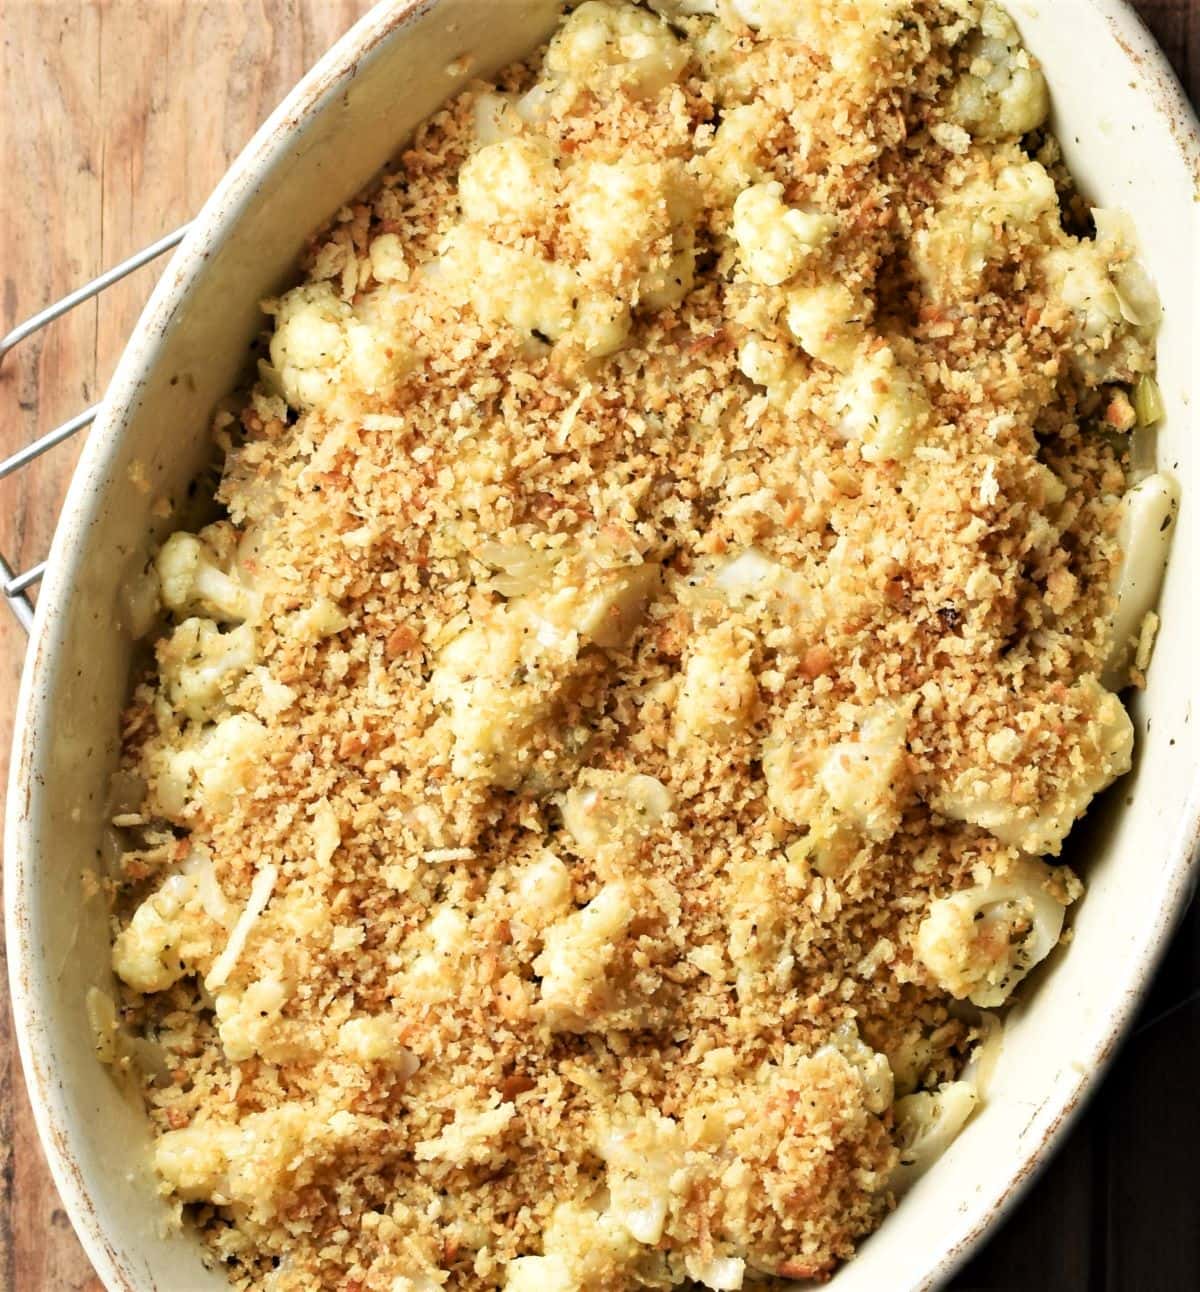 Top down view of cauliflower stuffing with breadcrumb topping in white oval dish.